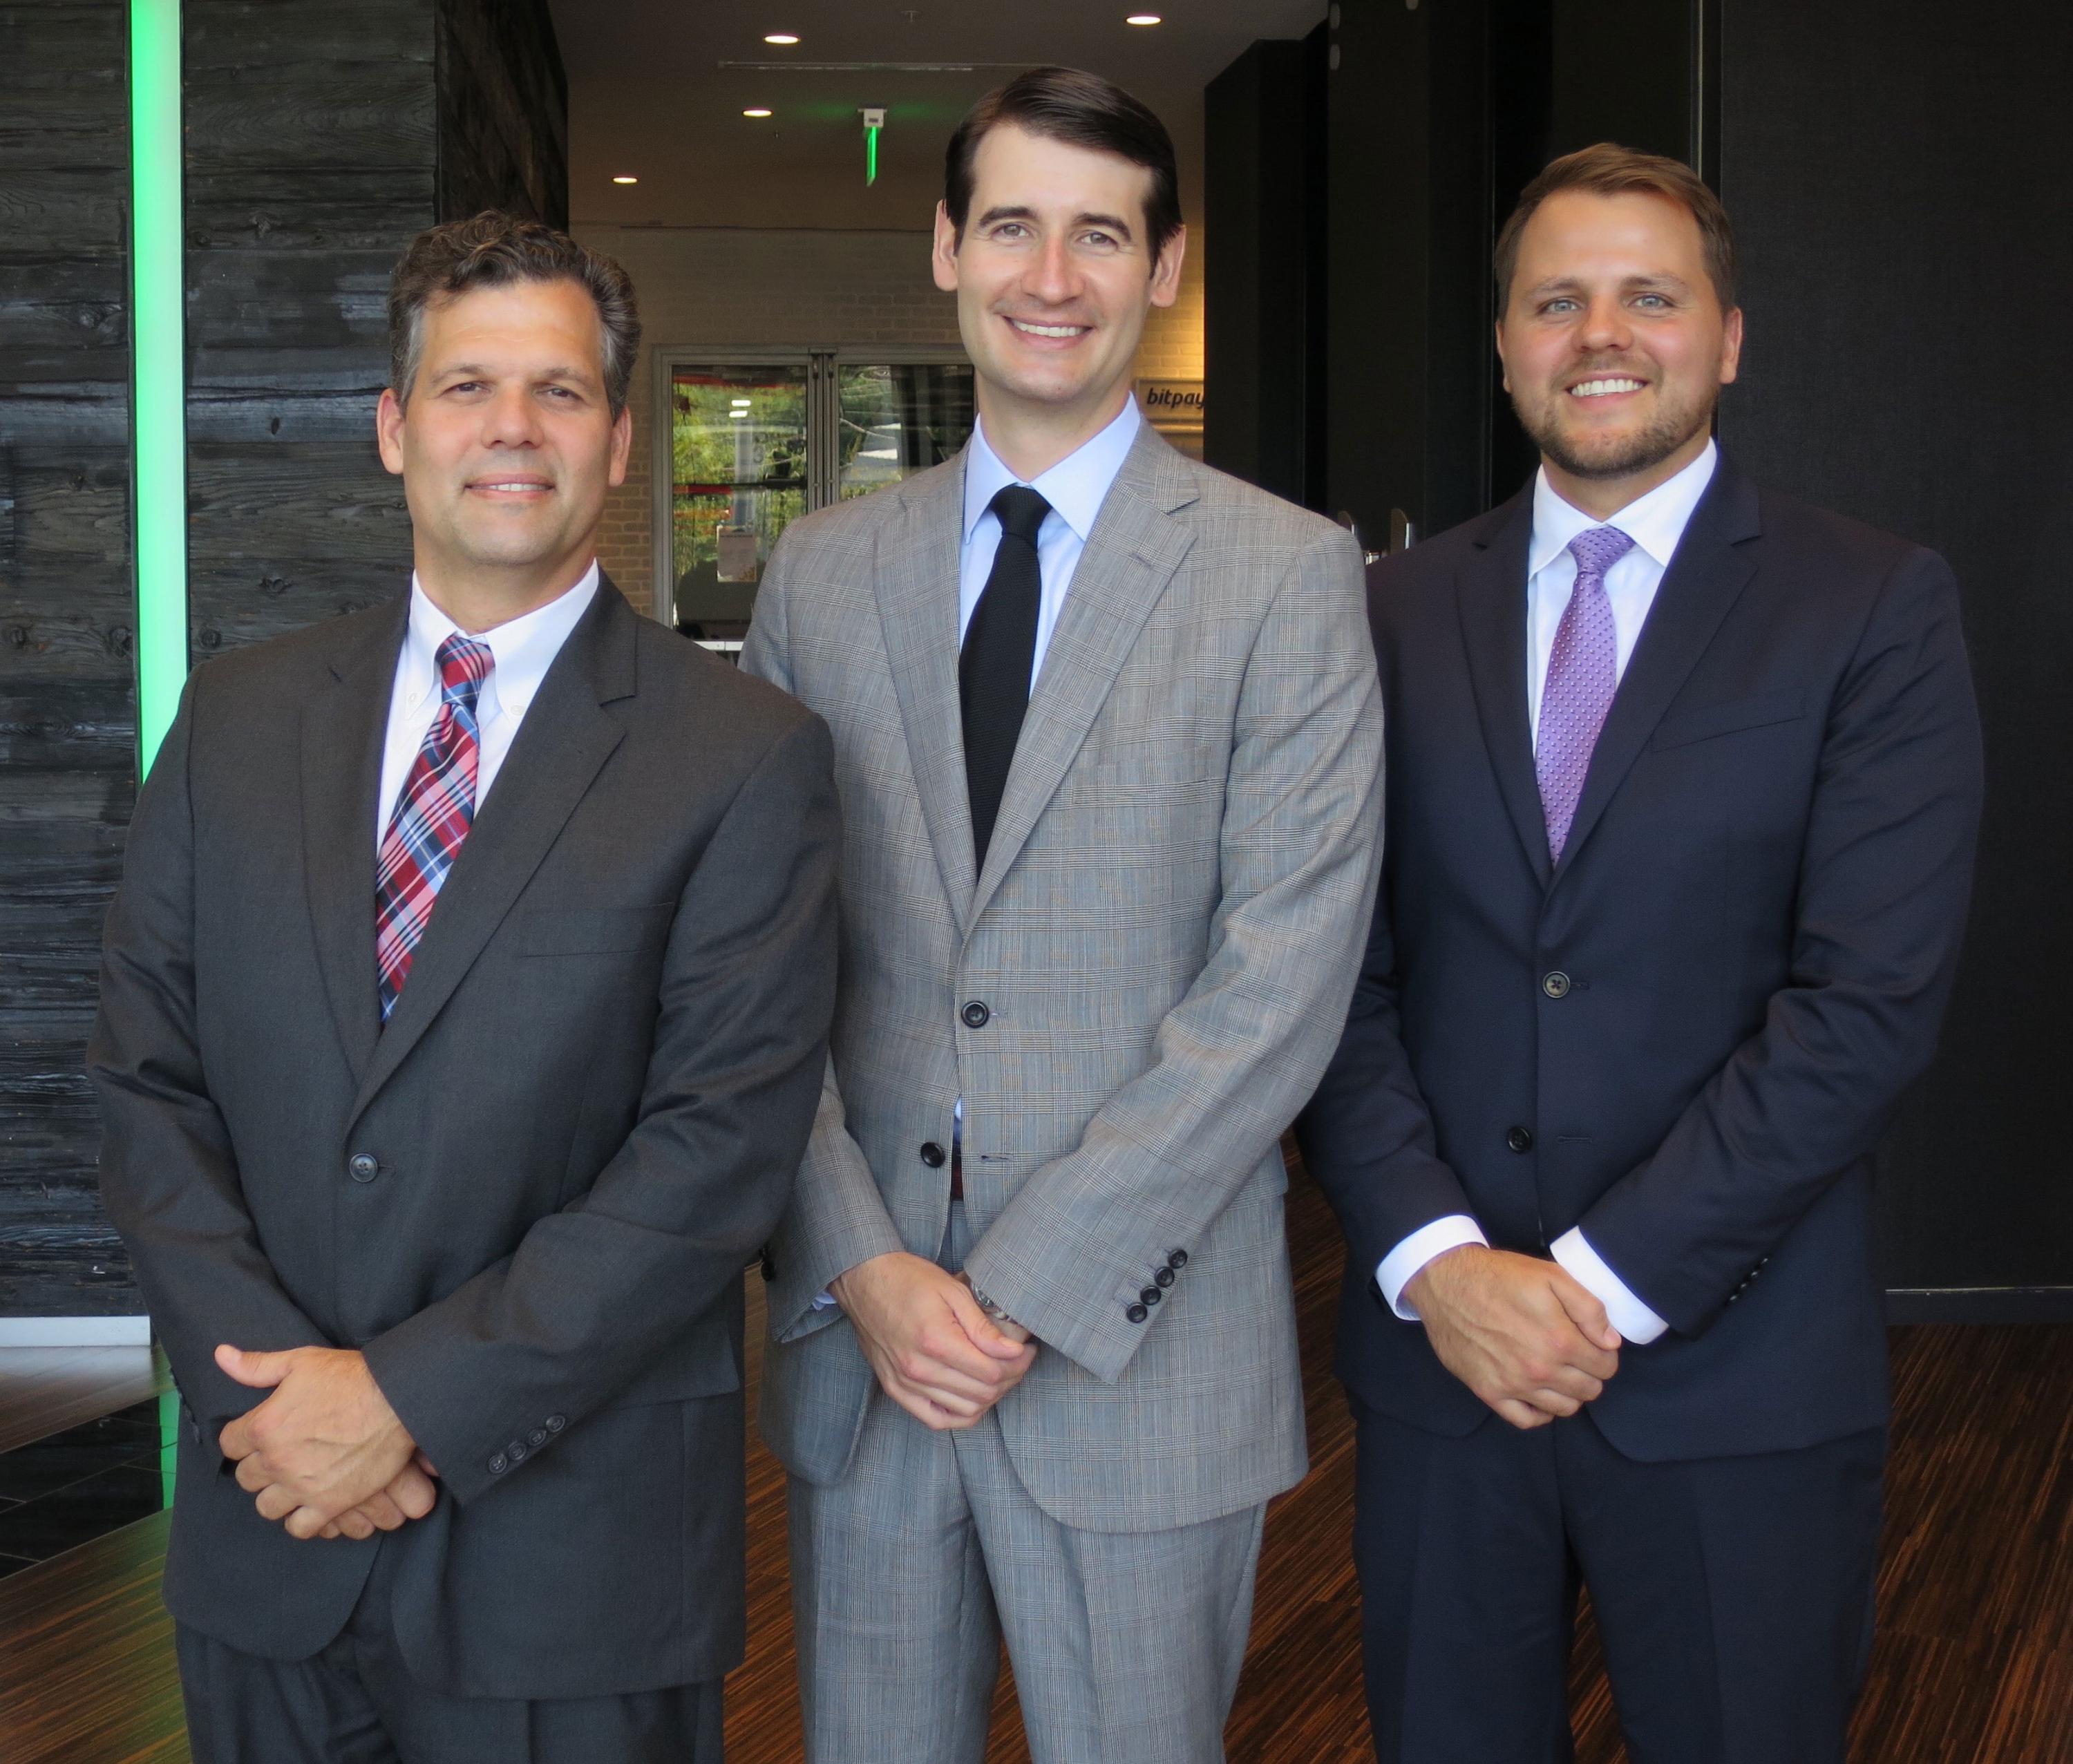 The management team at Micro C, a medical device startup based in Savannah, has developed a comprehensive, hand-held X-ray and digital camera for surgeons and physicians who treat disorders of the extremities. All three are Georgia Tech graduates. From left: Chief Operating Officer Kirby Sisk (BSME, MBA), Chief Executive Officer Evan Ruff (BSCmpE, MBA), and founder and Chief Medical Officer Dr. Greg Kolovich (BSEE, MPH).